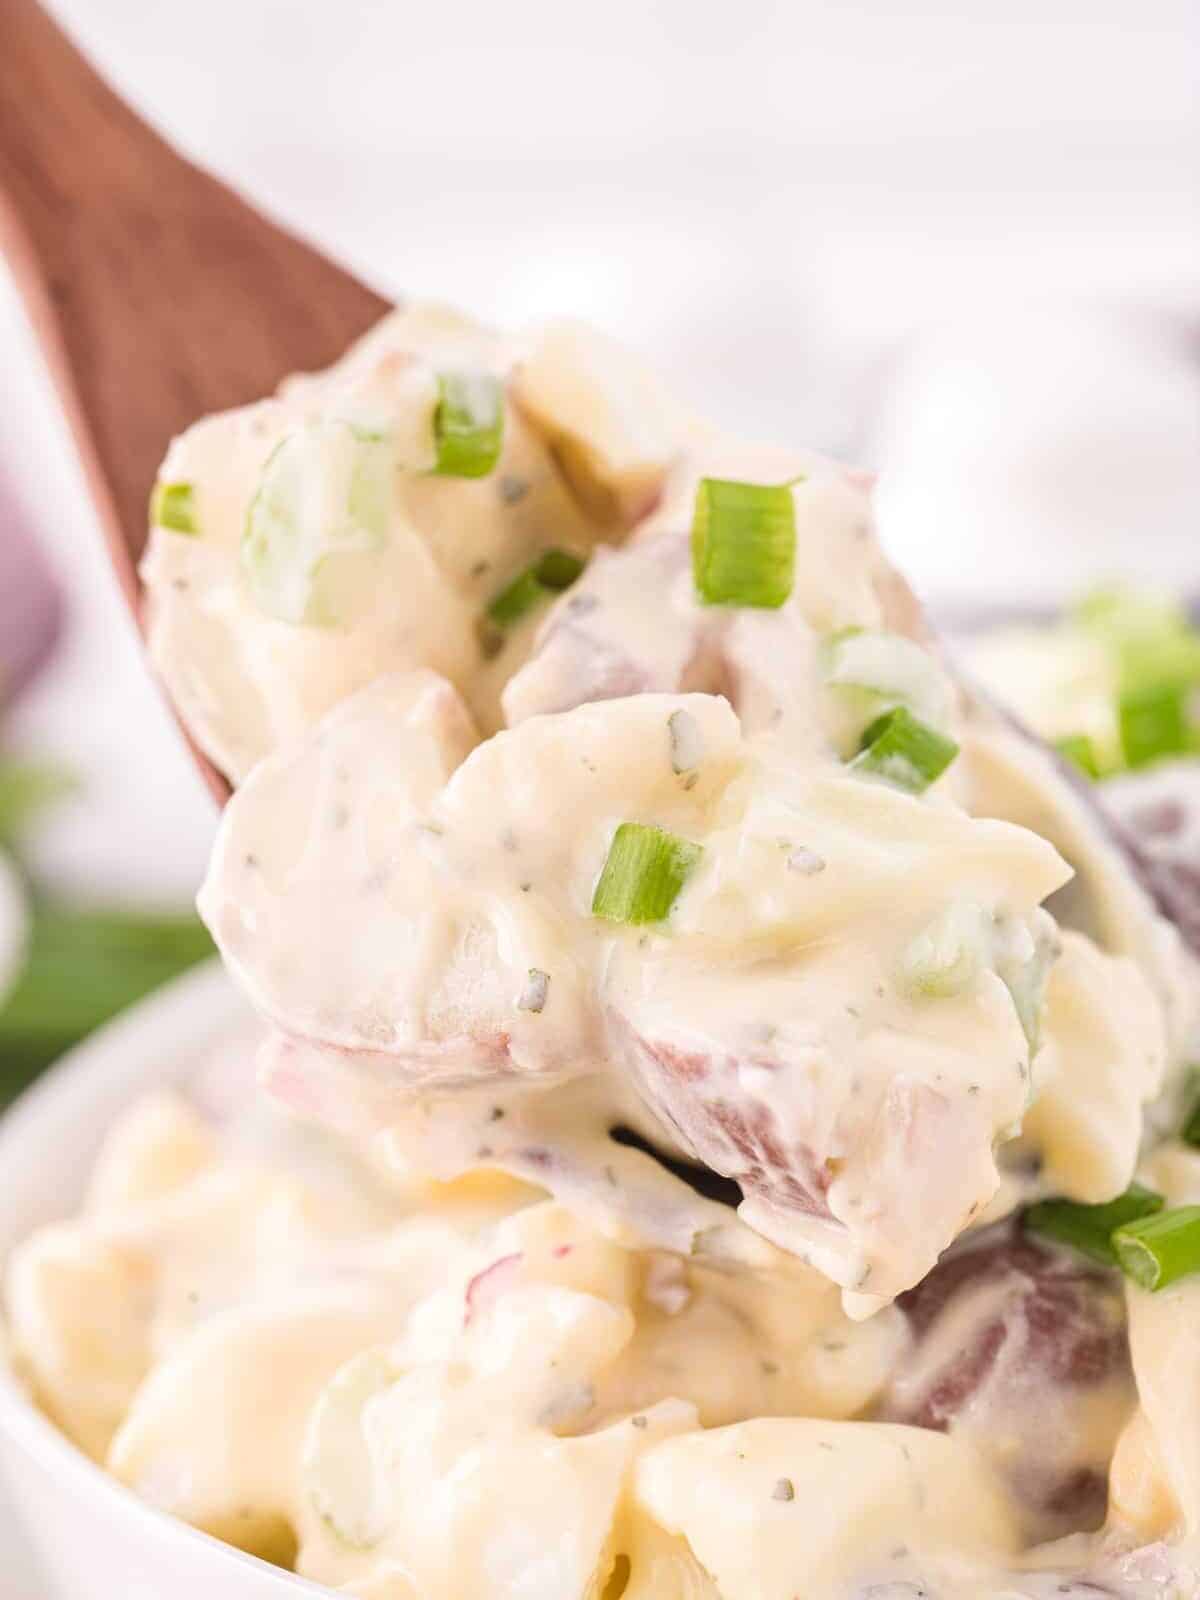 a wooden spoon scooping a spoonful of loaded ranch potato salad from a white bowl.